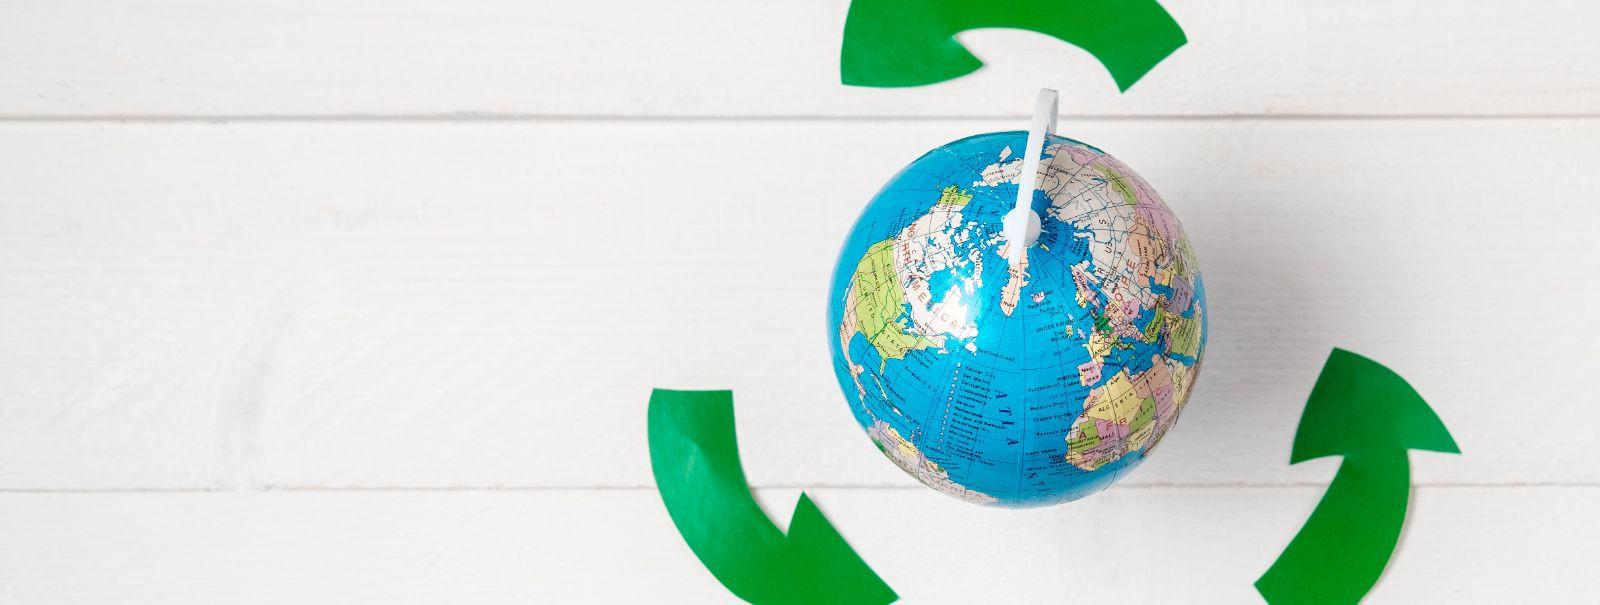 The circular economy is a regenerative system in which resource input, waste, emission, and energy leakage are minimized by slowing, closing, and narrowing mate